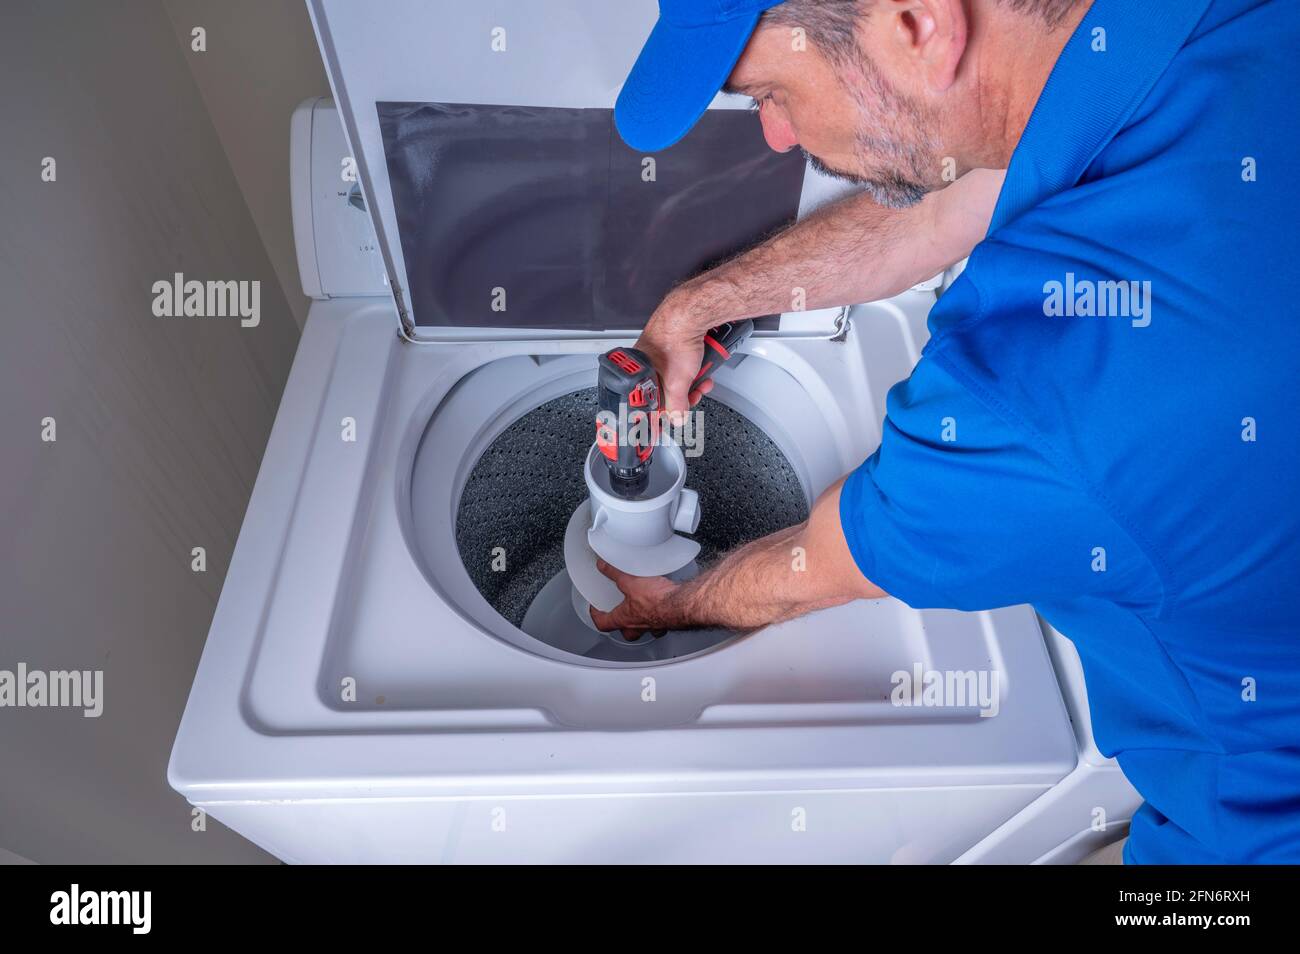 Appliance technician in a blue uniform installing a agitator on a washing machine, using a cordless drill Stock Photo